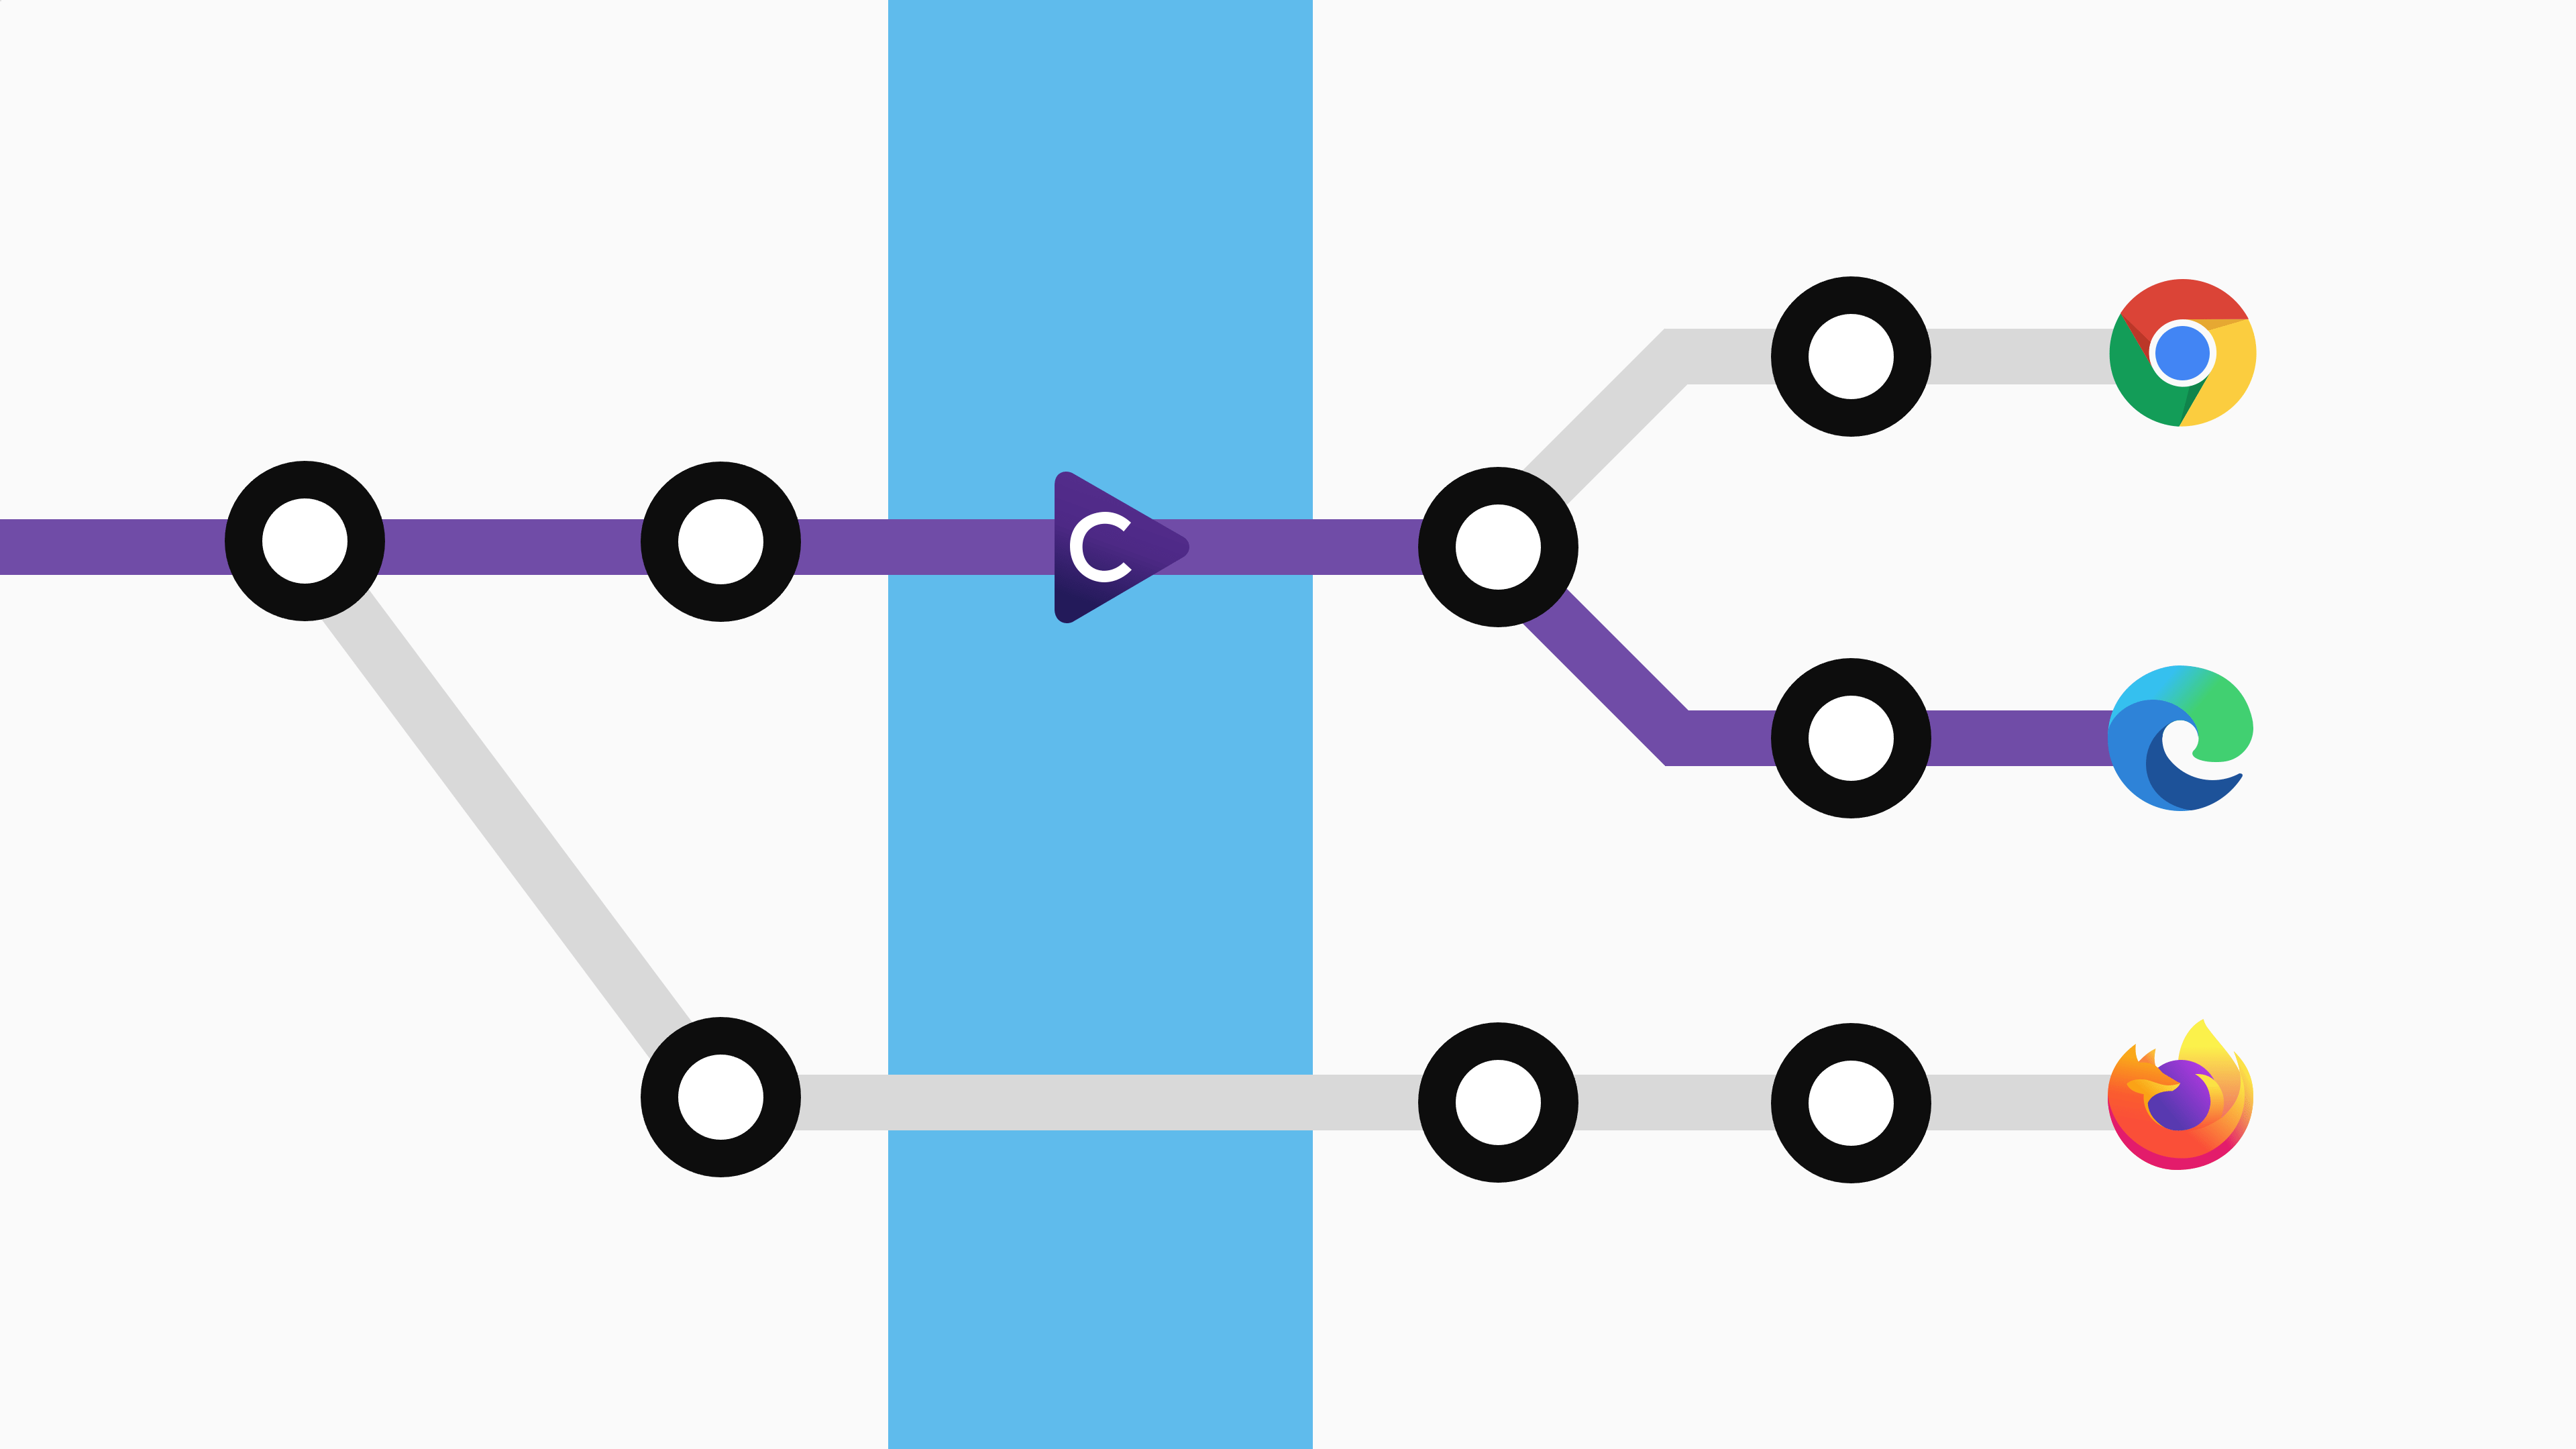 Subway map that shows a network with several routes to Web browsers. One of the routes is highlighted by the Choosy app icon.
